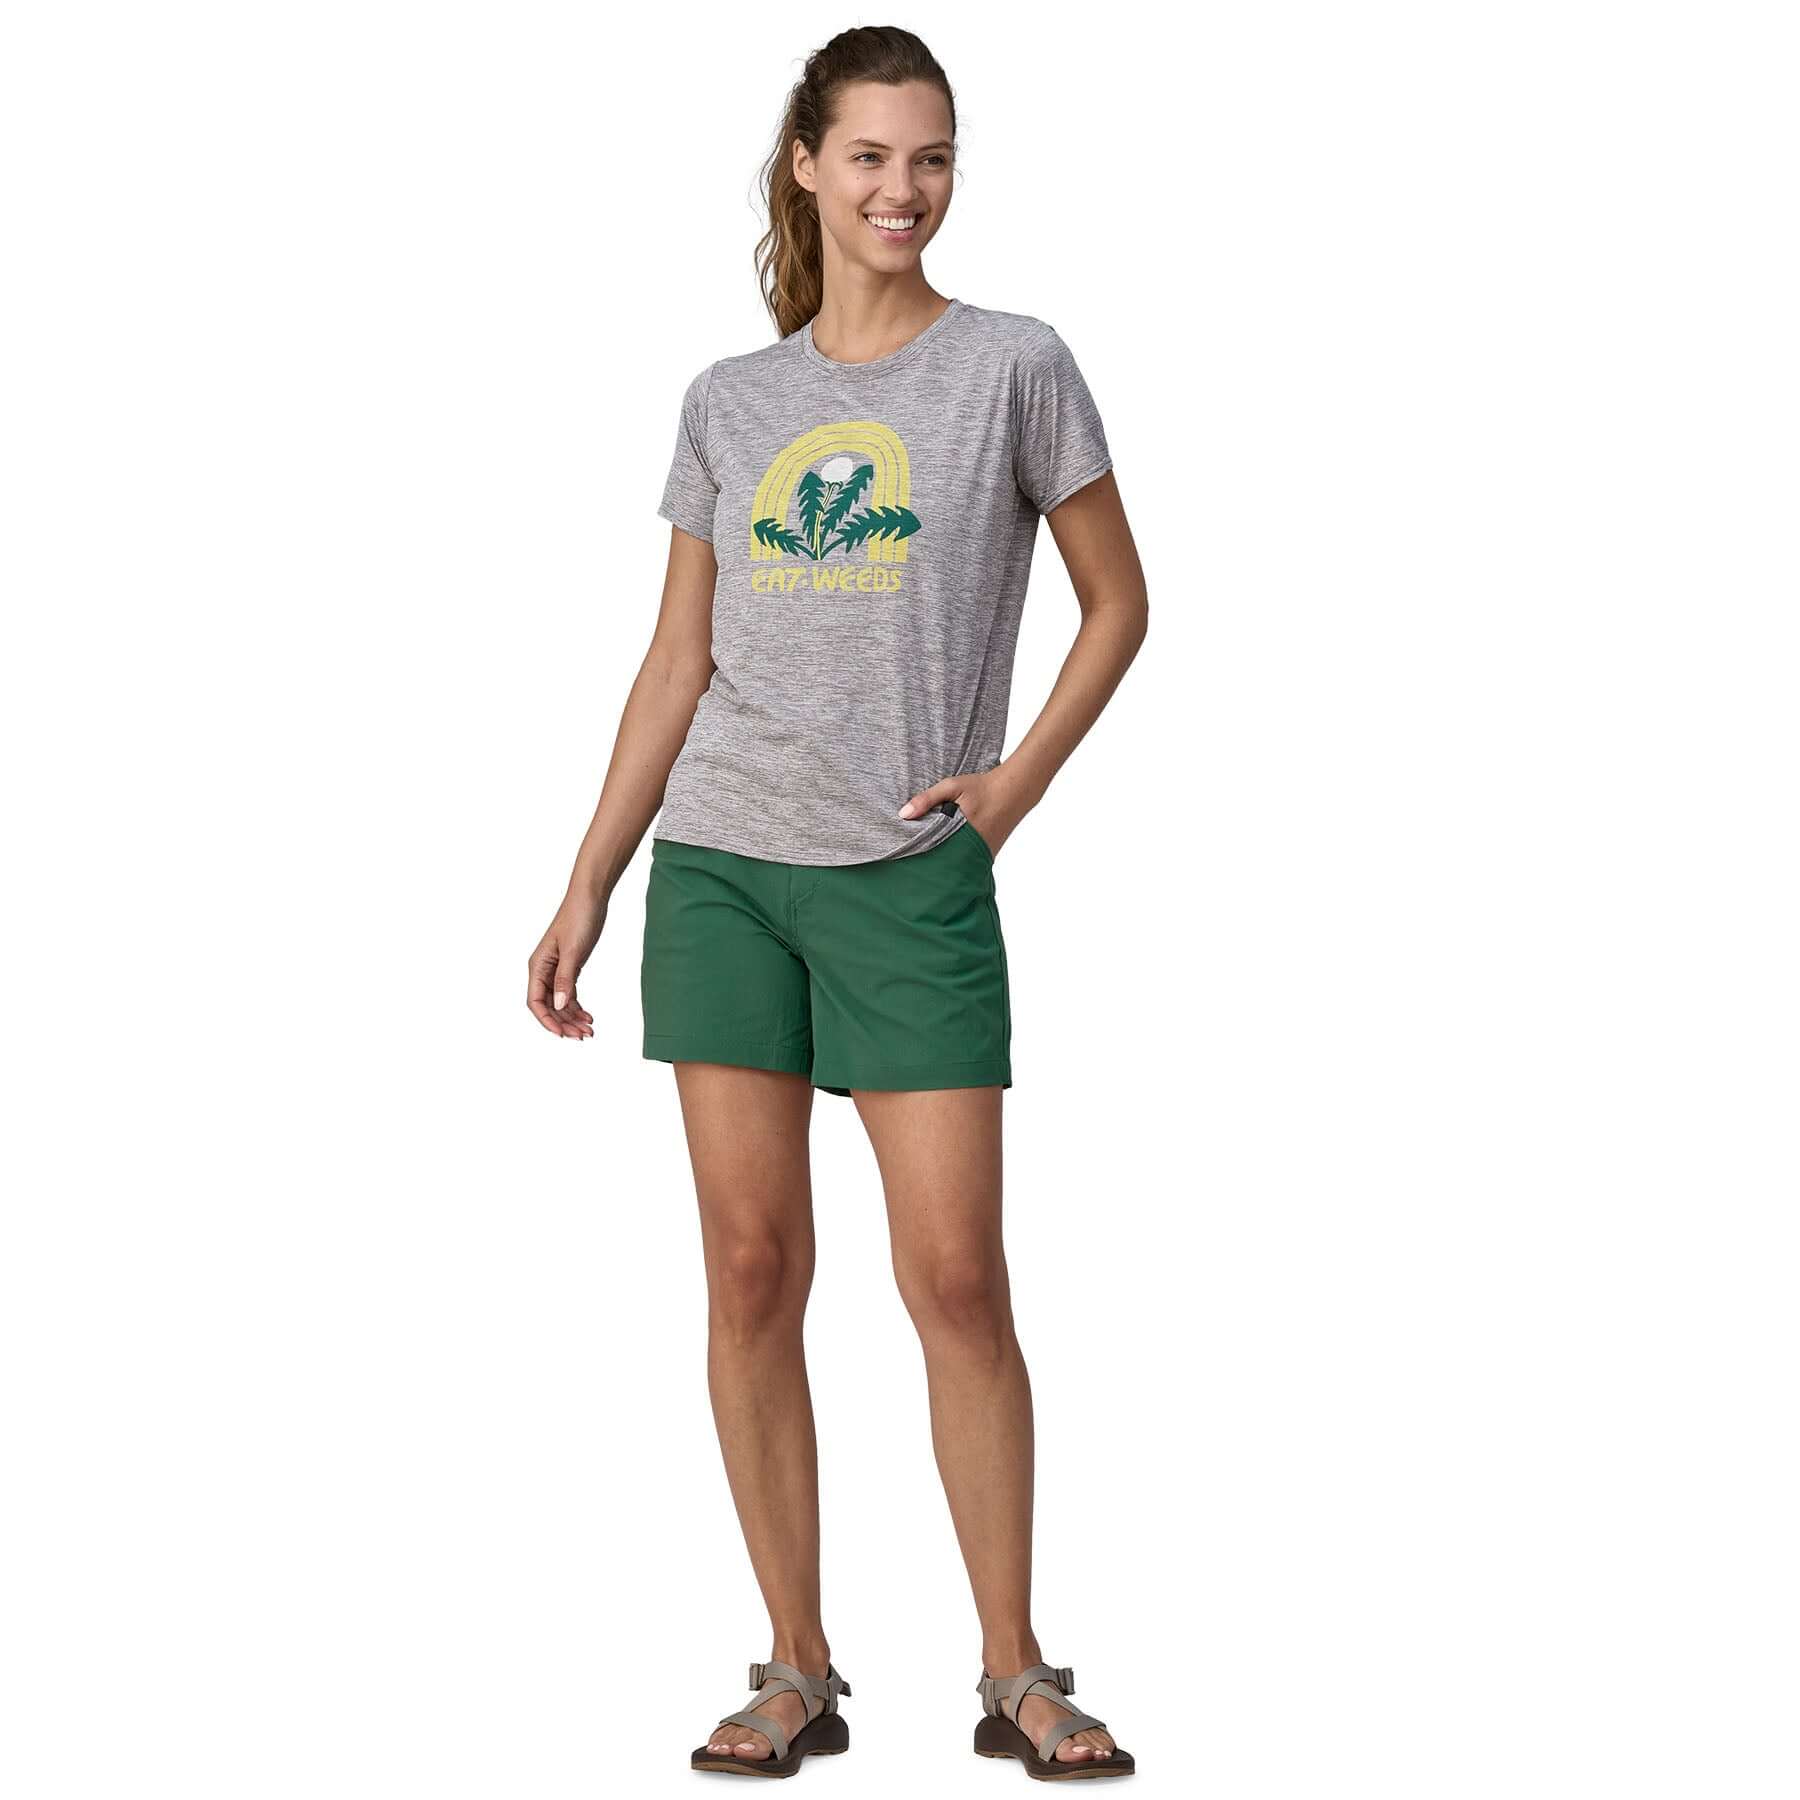 Women's Quandary Shorts - 5 in. in Conifer Green | Patagonia Bend